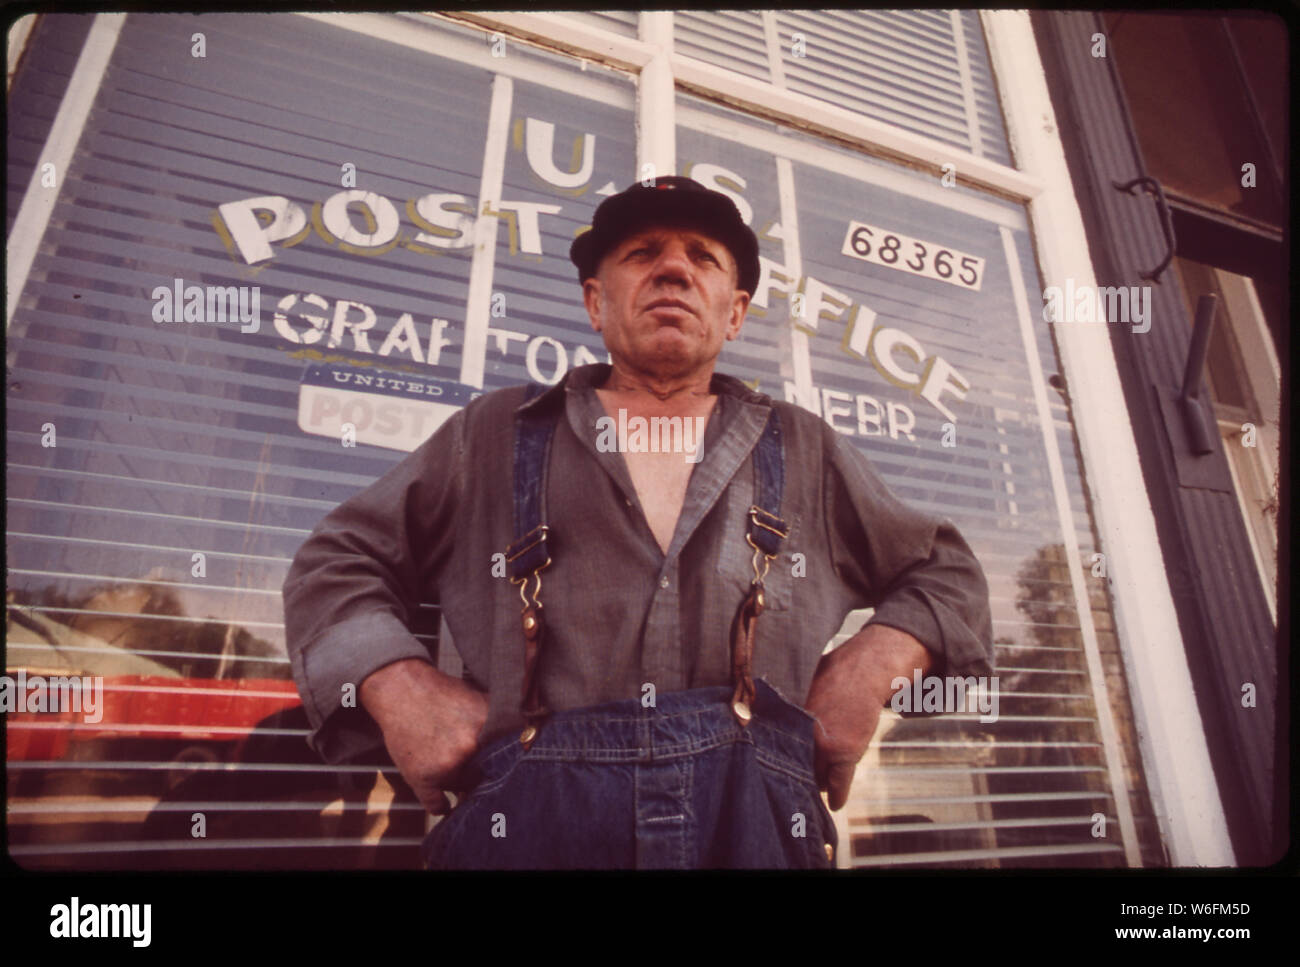 CHARLIE GROSS OUTSIDE GRAFTON POST OFFICE. A FORMER FARMER TRUCK DRIVER, BOXER, DOG RAISER AND SALESMAN, HE HAS LIVED IN NEBRASKA MORE THAN HALF HIS LIFE Stock Photo